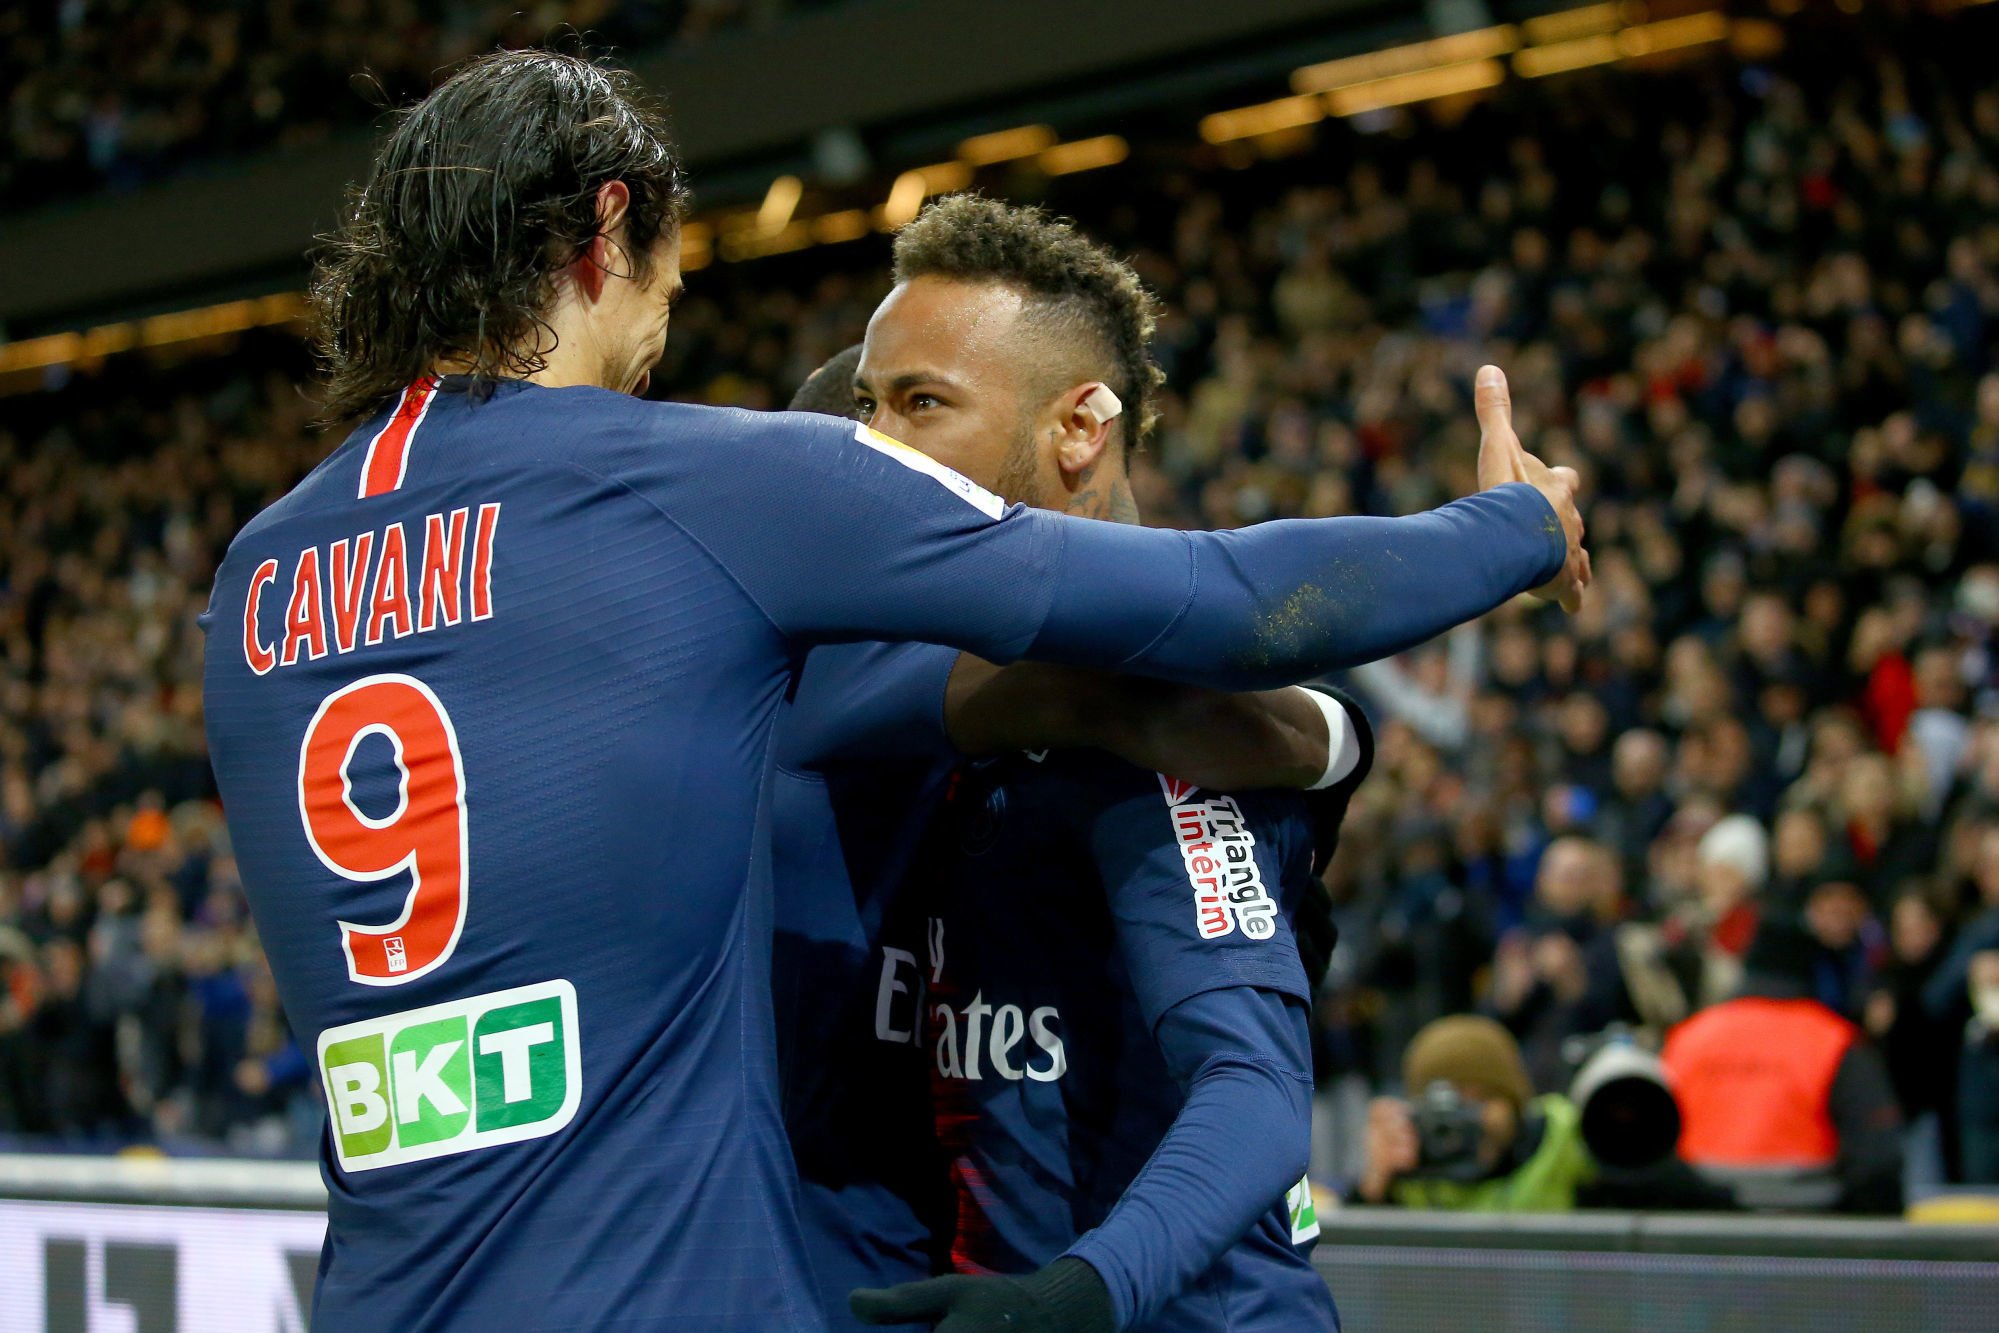 Edinson Cavani of Paris Saint Germain and Neymar Jr of Paris Saint Germain, celebrate the goal during the French Cup match between Paris Saint Germain and Guingamp at Parc des Princes on January 9, 2019 in Paris, France. (Photo by Pierre Costabadie/Icon Sport)